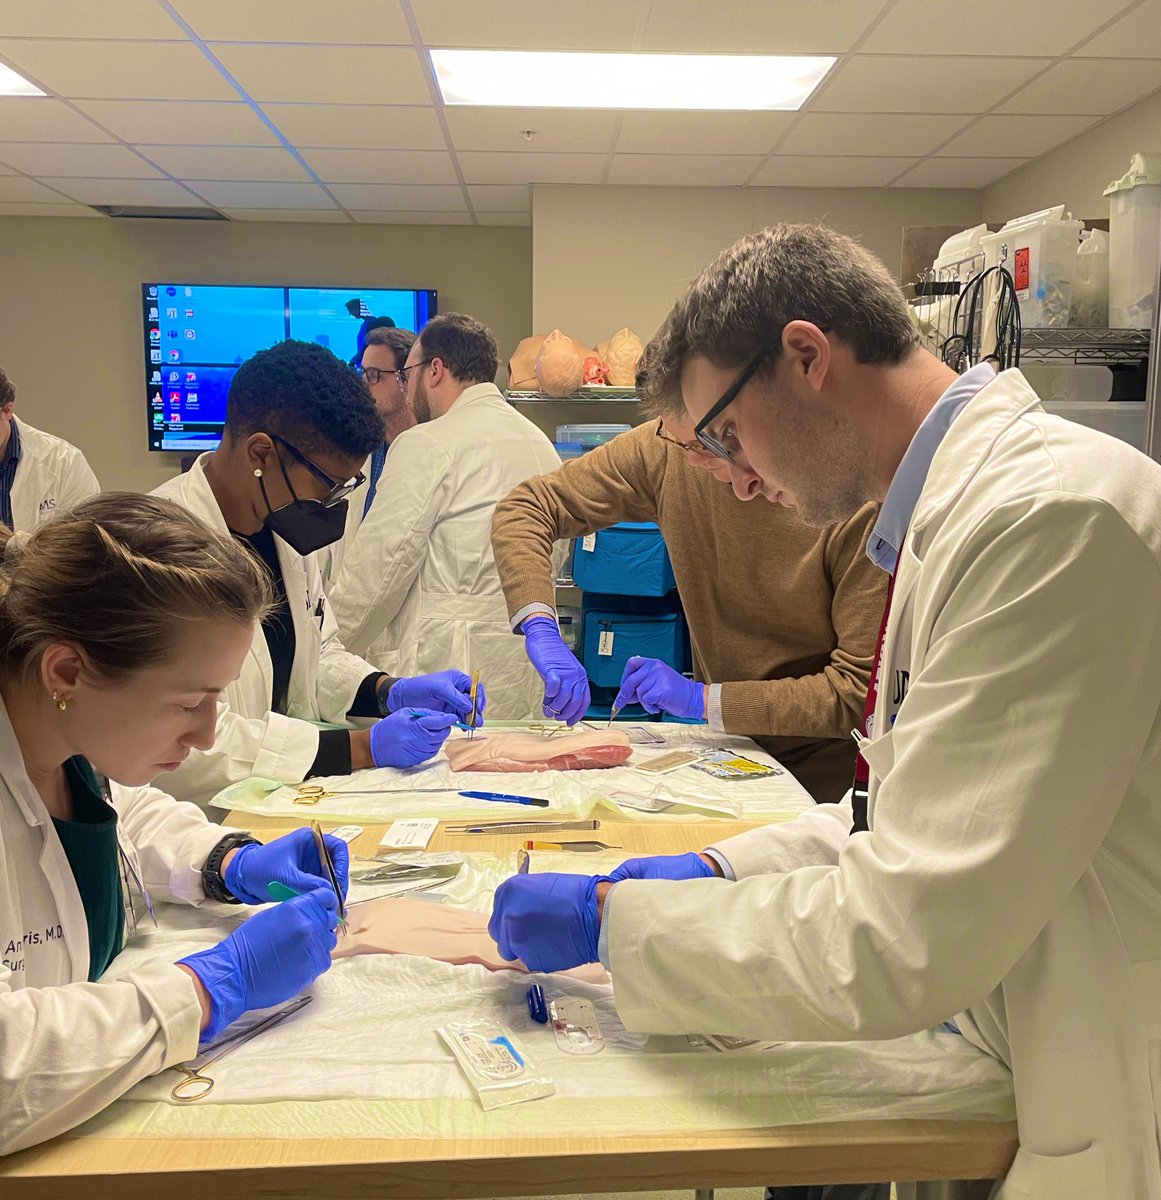 Great session led by @UAMS_Surgery Dr Wolter for our @uamshealth surgery interns on skin flaps & skin grafting Rehearsing skills as part of phase 1 ACSAPDS curriculum to optimize educational opportunities within the OR @AmCollSurgeons @APDSurgery #Match2024 #gensurgmatch2024